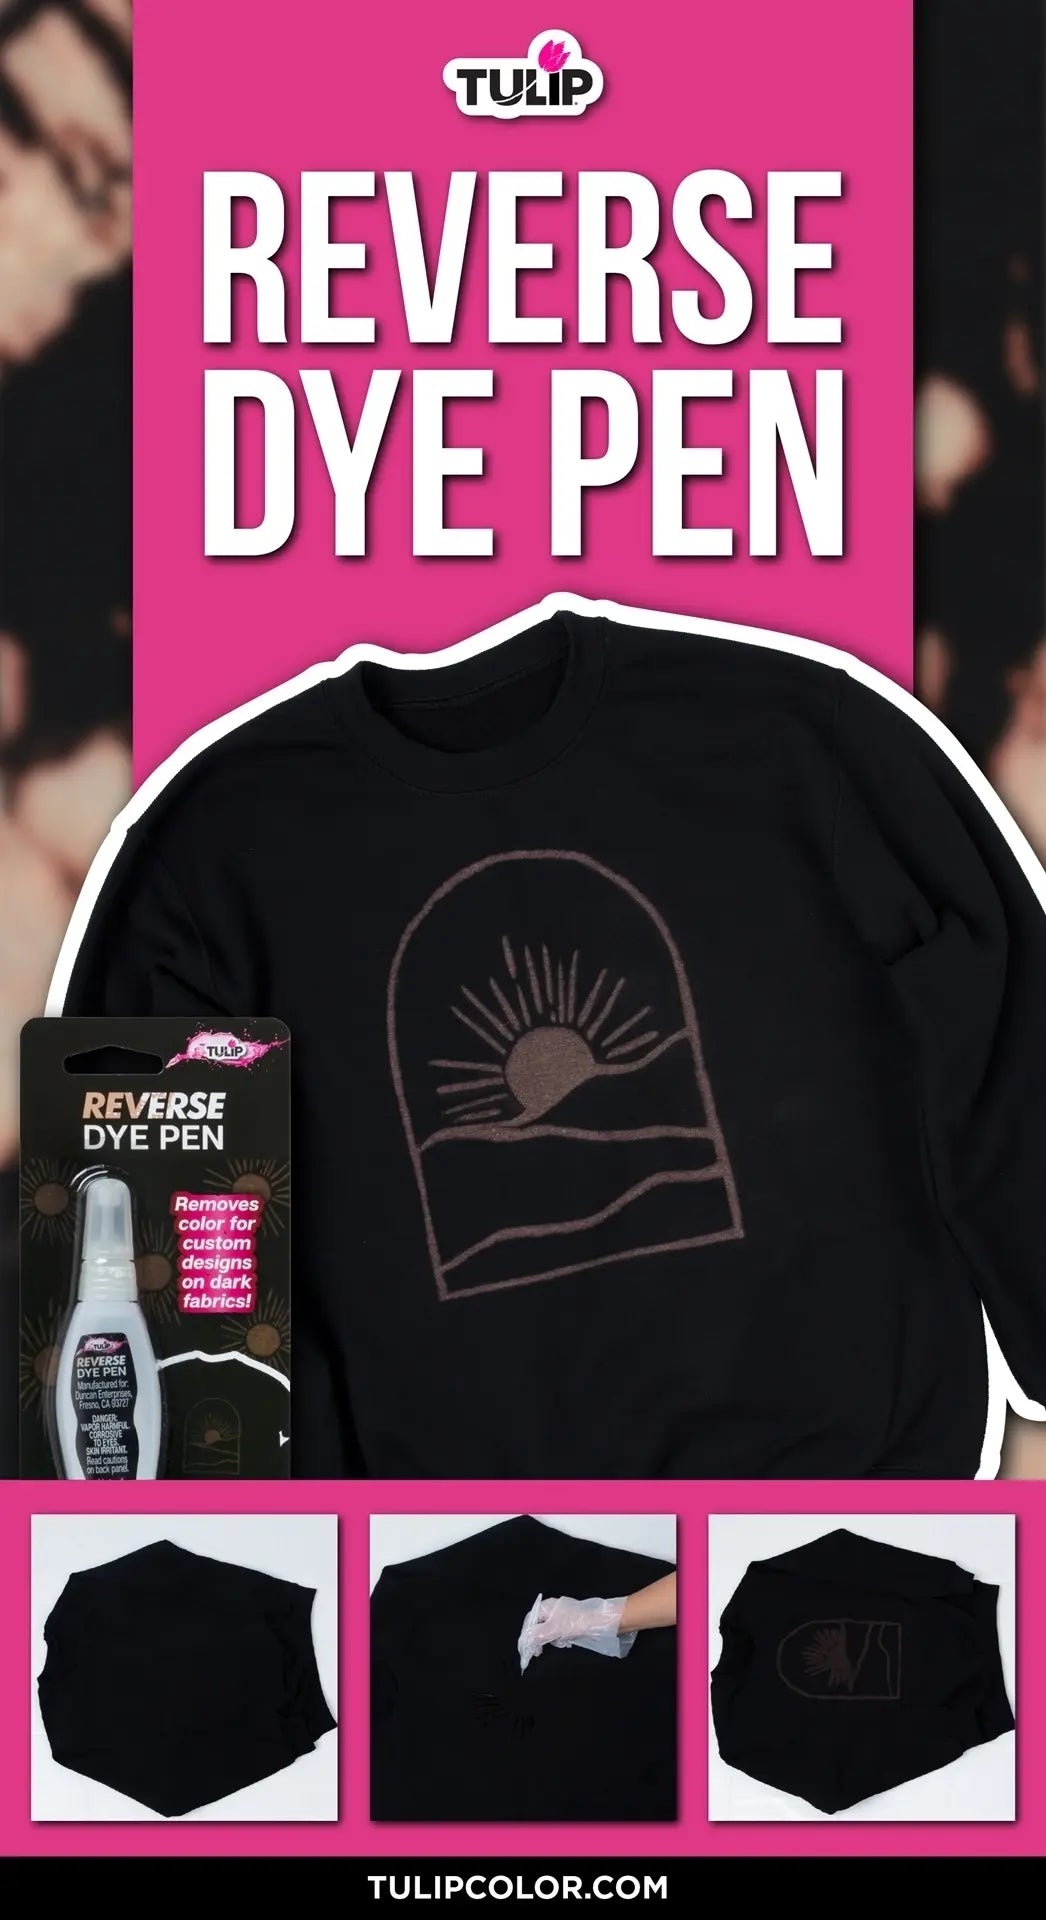 How to Use the Tulip Reverse Dye Pen